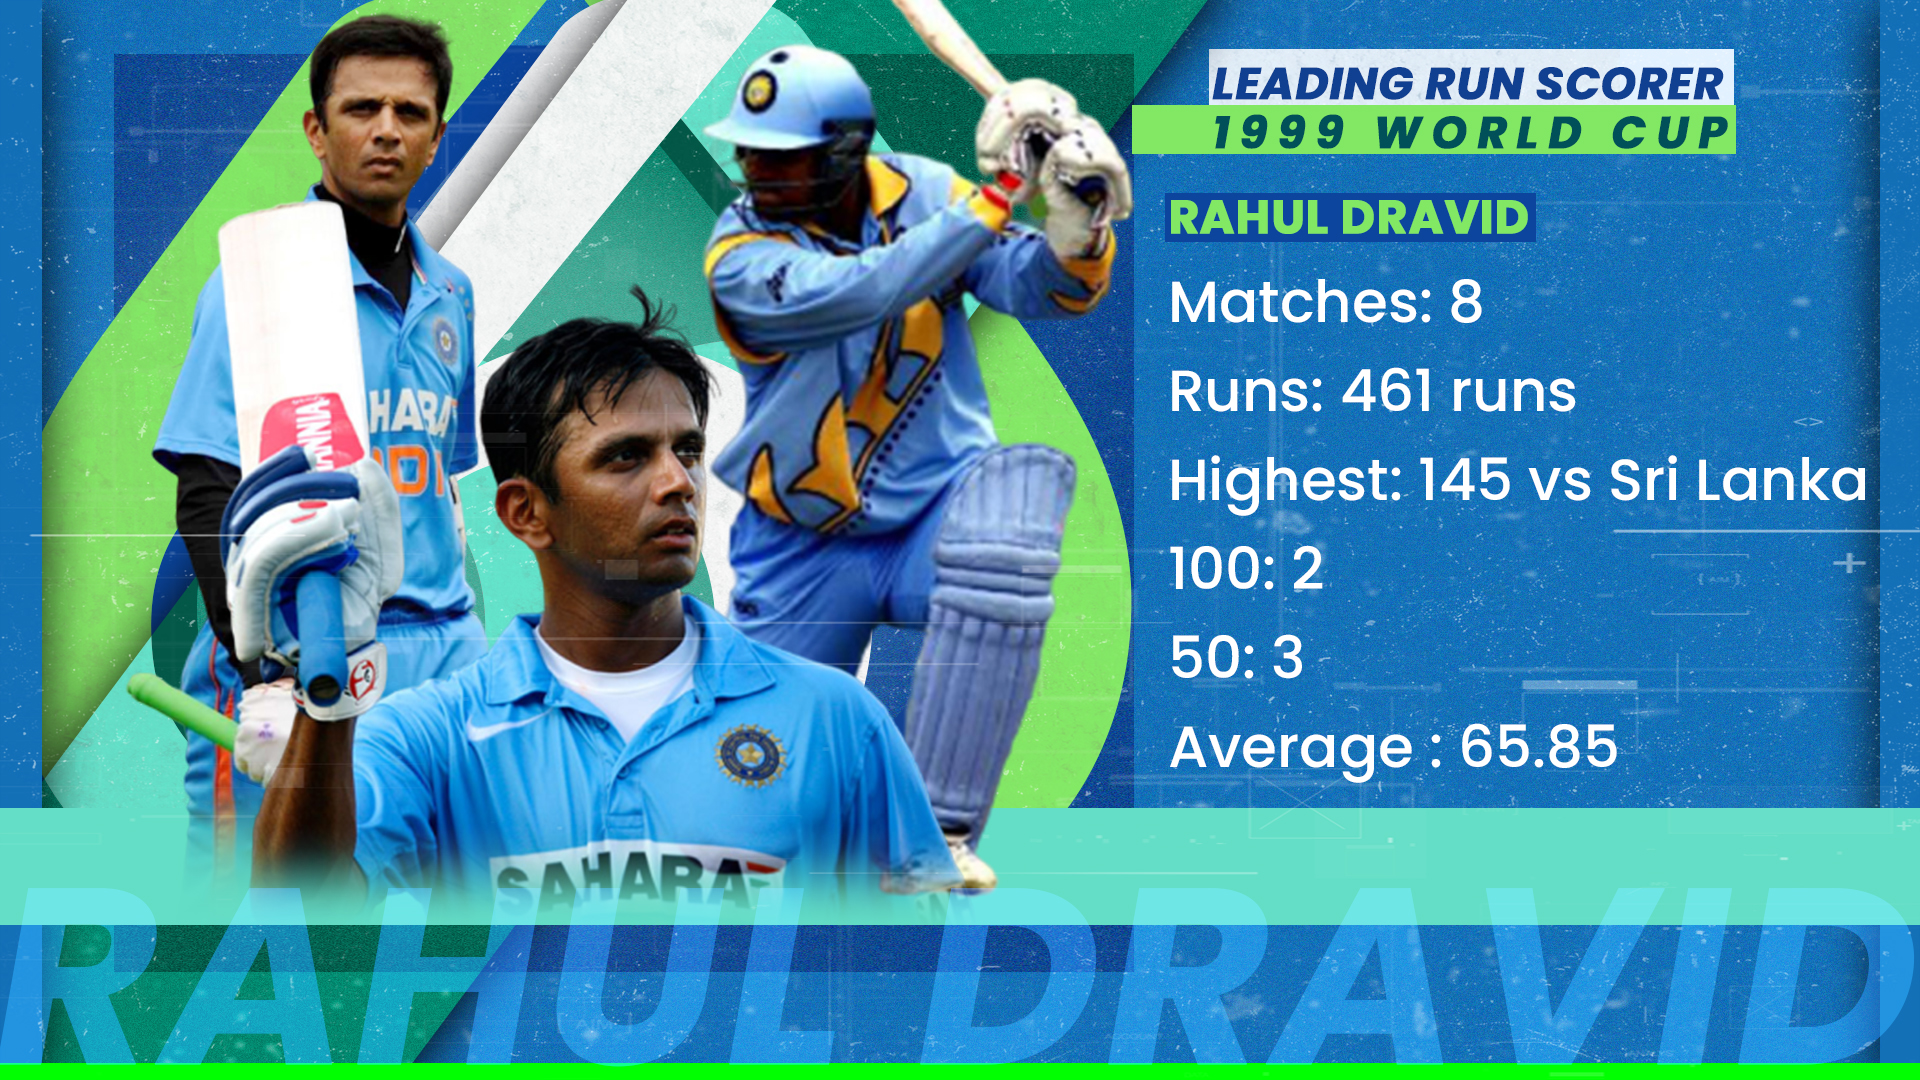 Rahul Dravid was the leading run scorer in 1999 World Cup.